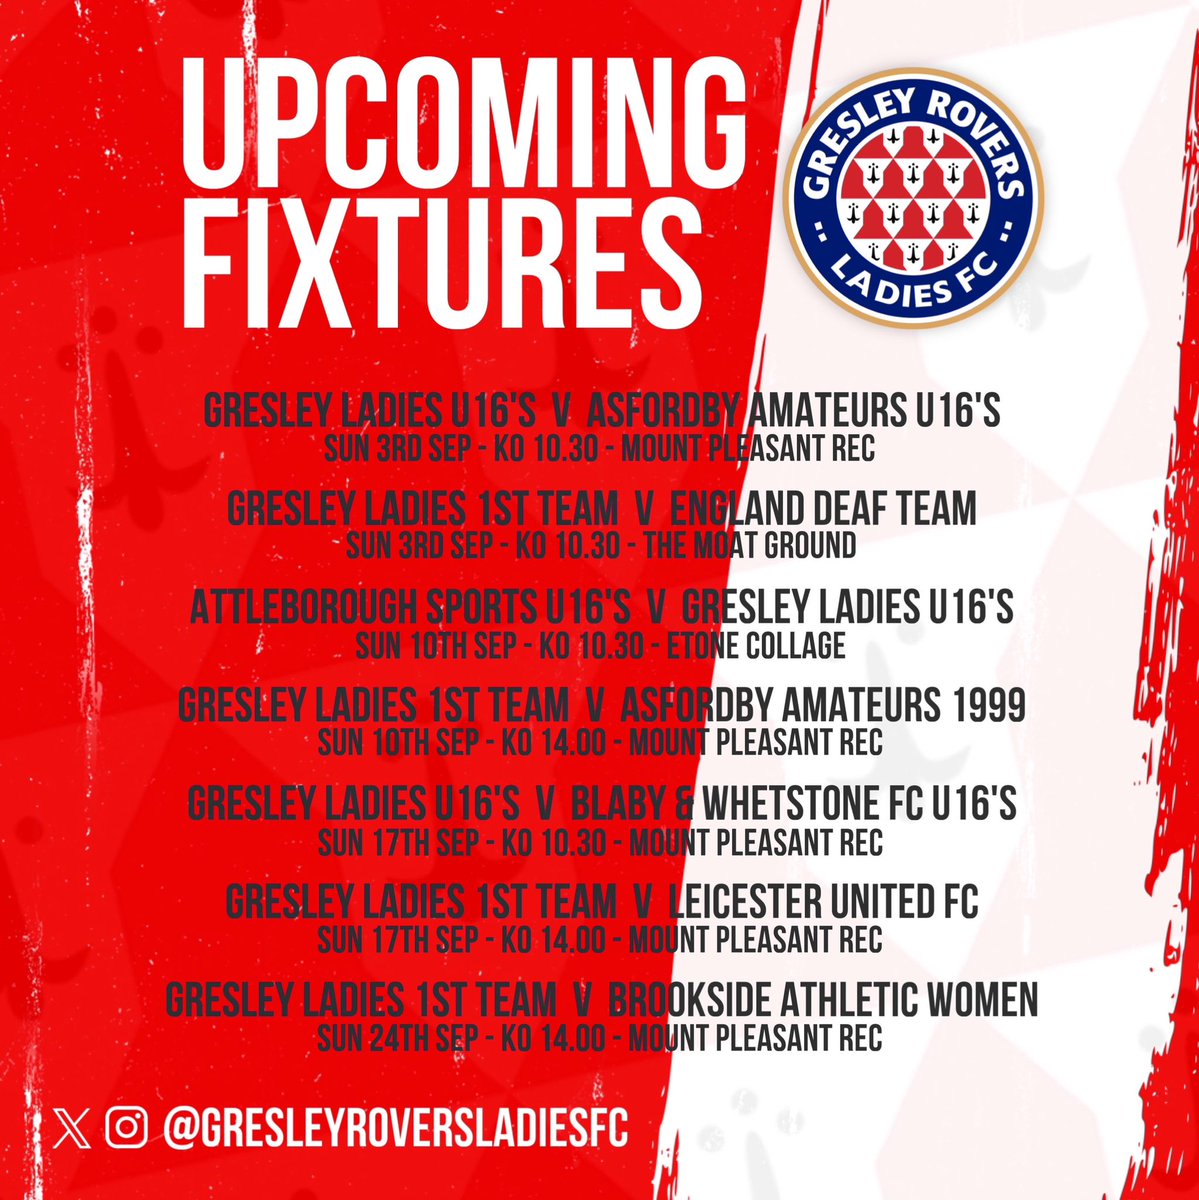 The fixtures for September and the start of the season are out 👇we would love your support. 🔴⚪ join the Roverlution. #team #teamwork #womensfootball #womenshealth